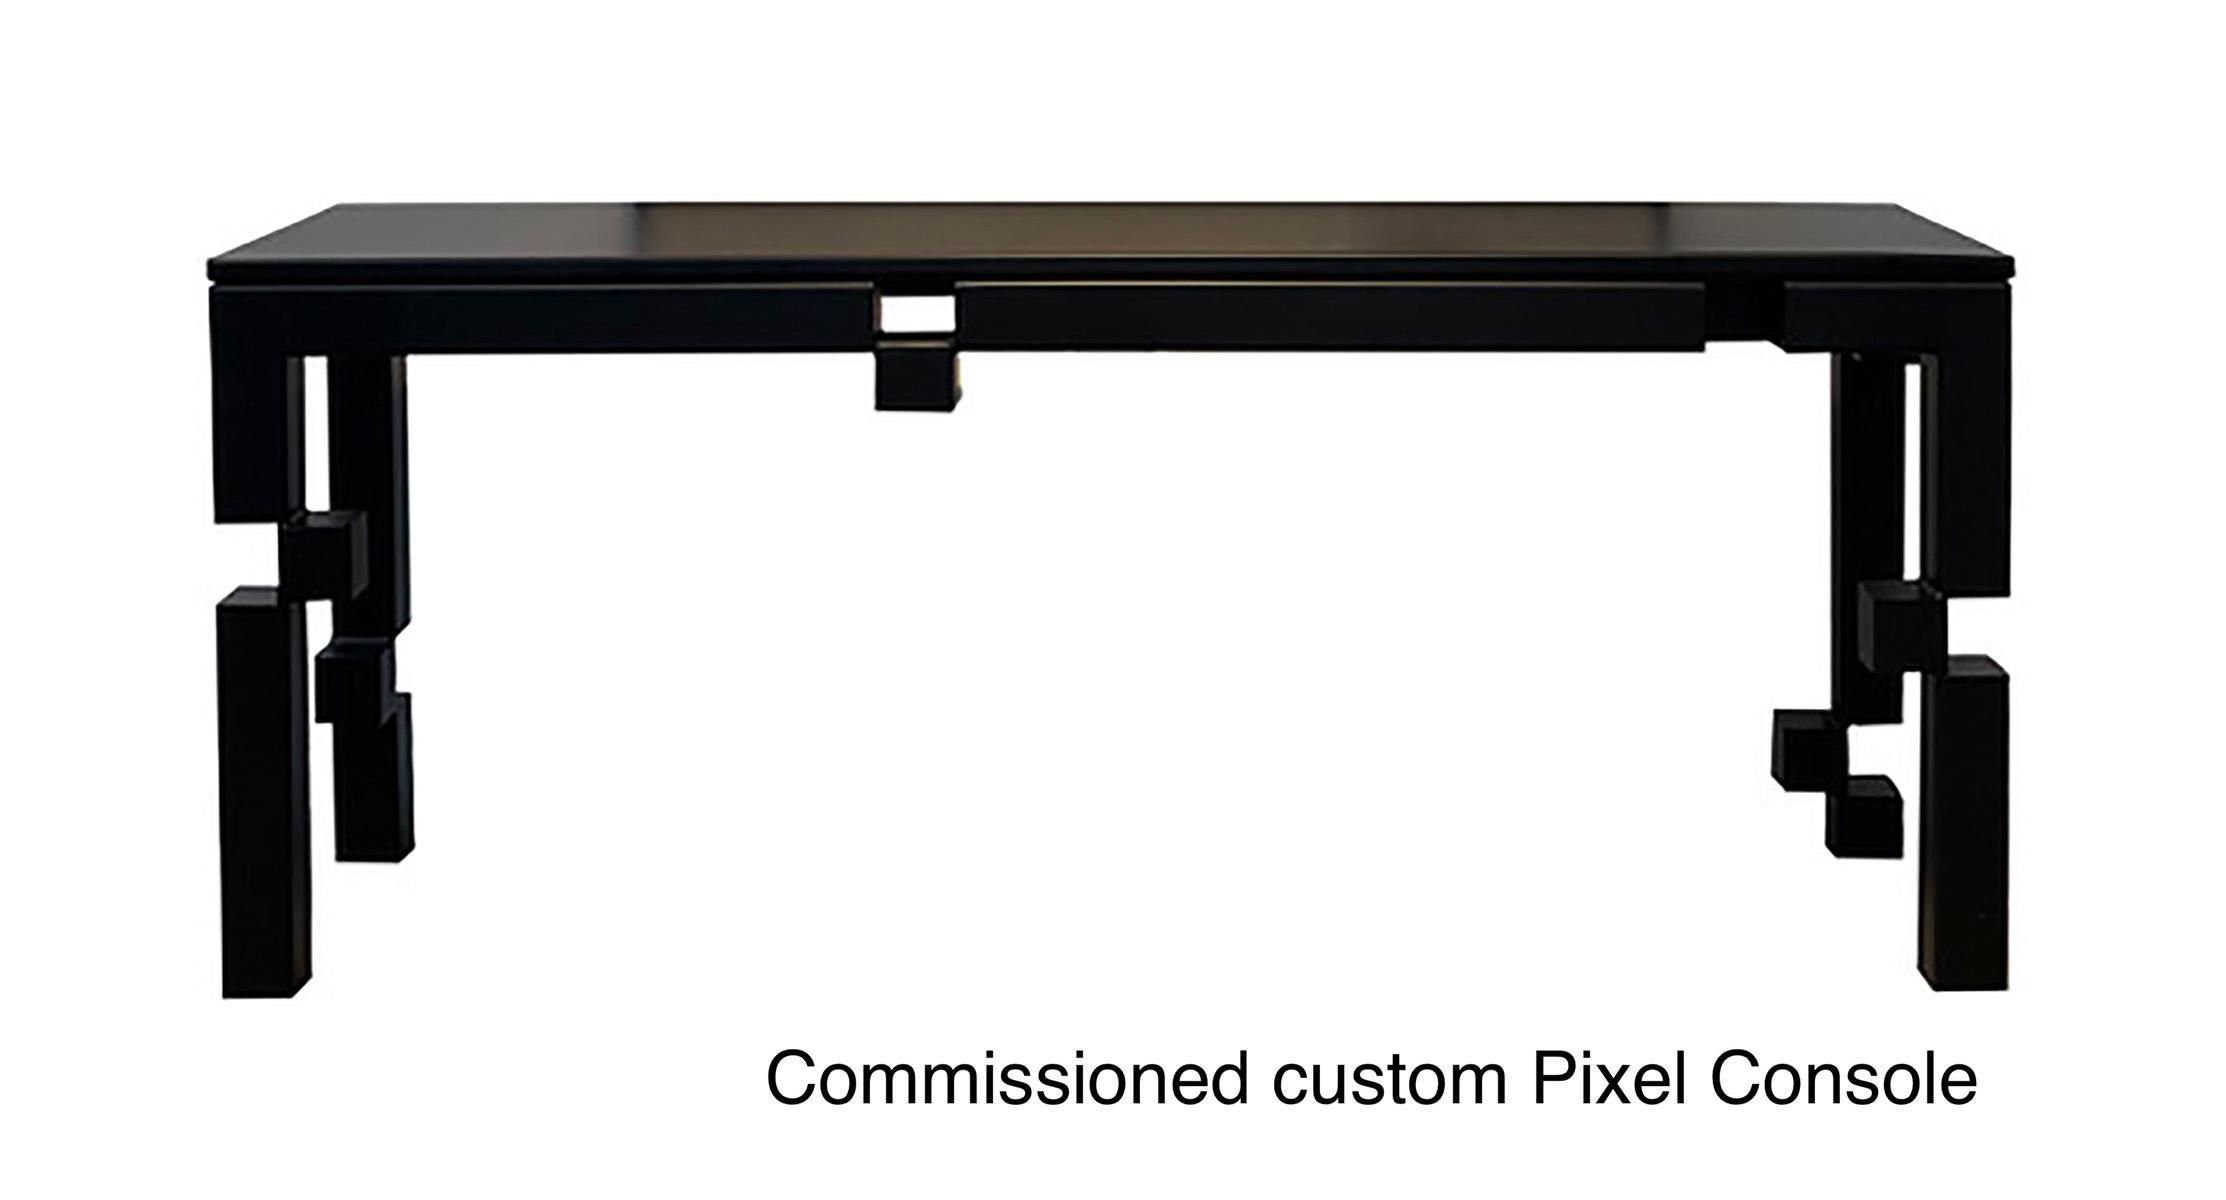 Contemporary Pixel Console by Morgan Clayhall - Sculptural steel, hand finished, custom For Sale